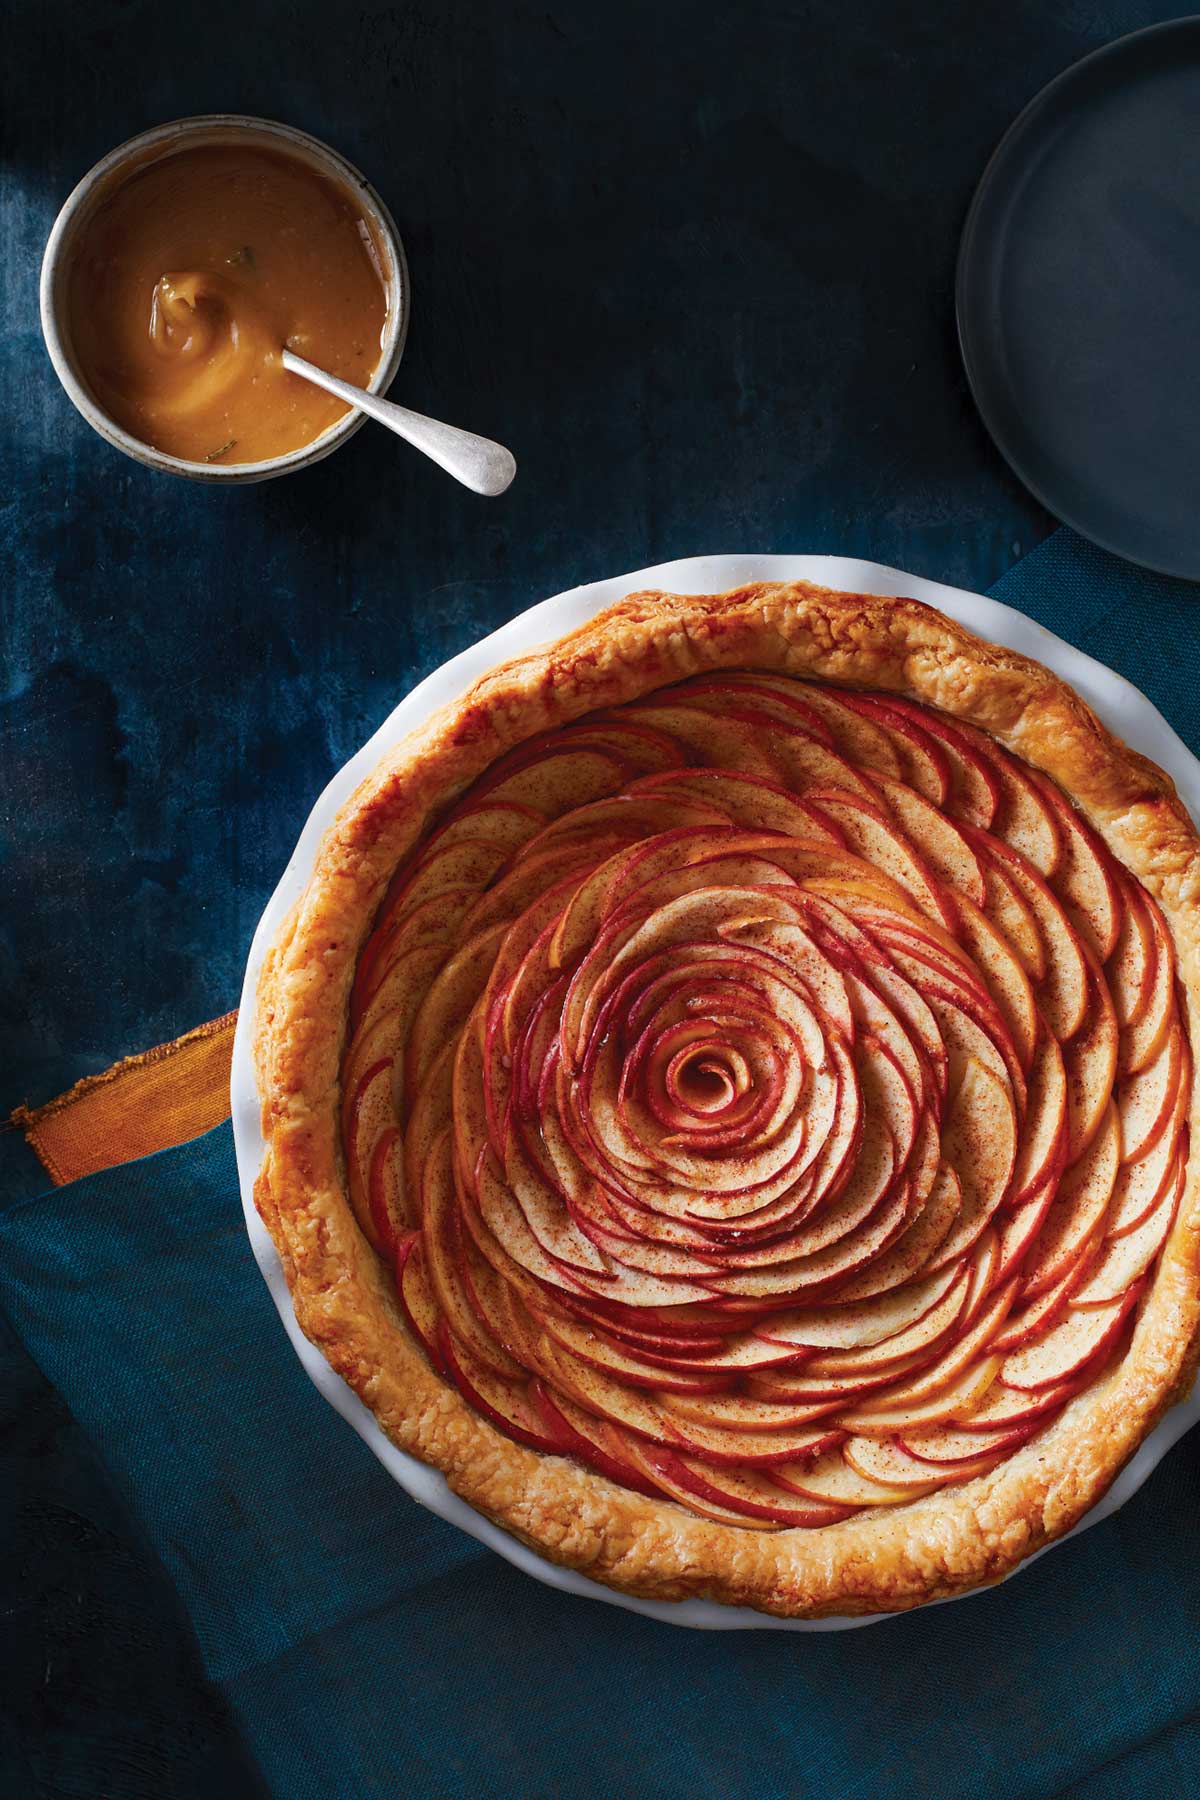 A rose apple pie next to a cup of coffee